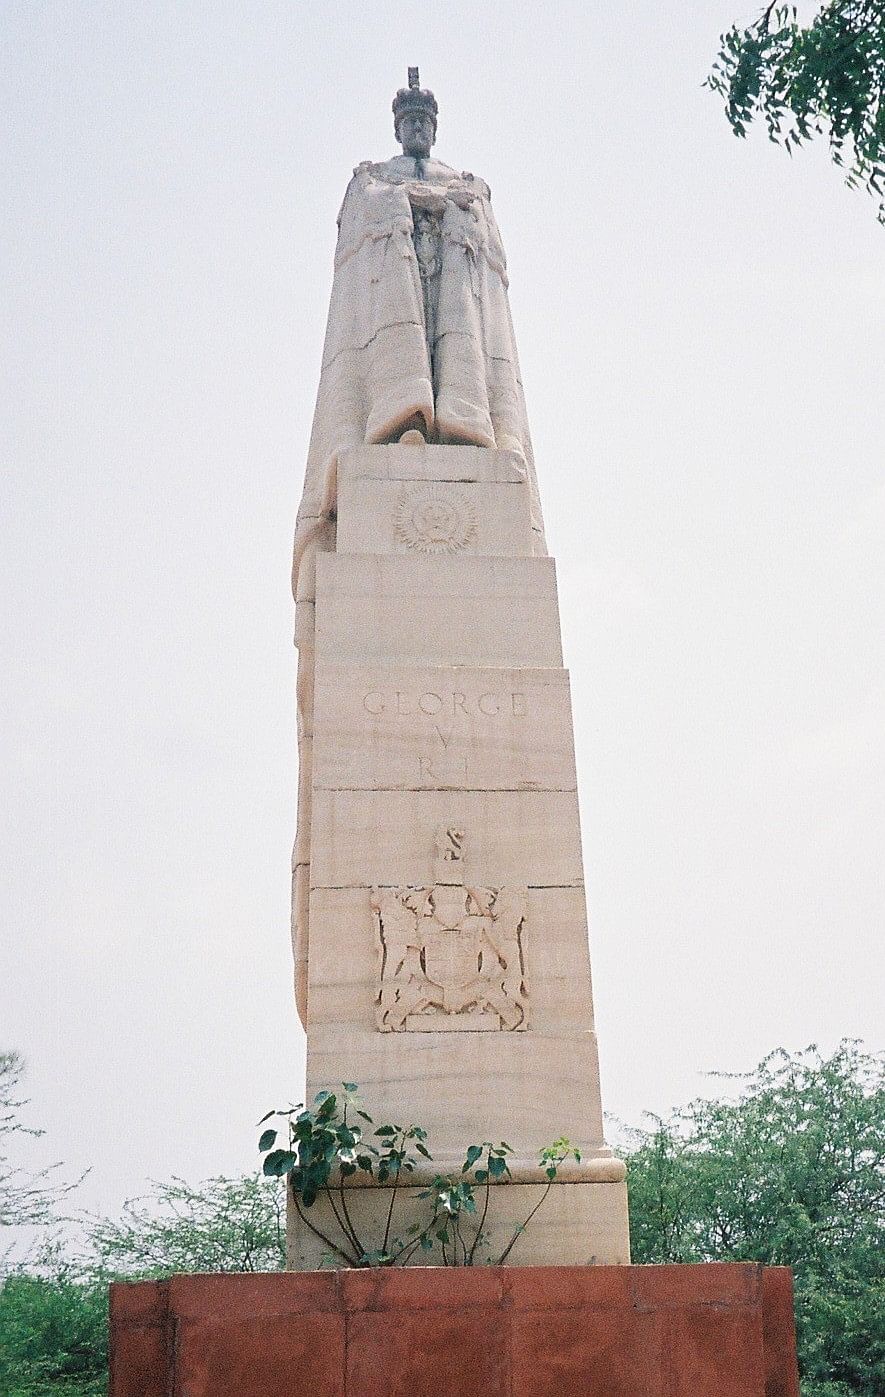 King George V’s statue now lies in Coronation Park, opposite the Obelisk. (Photo Courtesy: <a href="https://upload.wikimedia.org/wikipedia/commons/6/68/Emperor_King_F_George_V%27s_statue_now_at_Coronation_Park1.JPG">Wikipedia</a>)